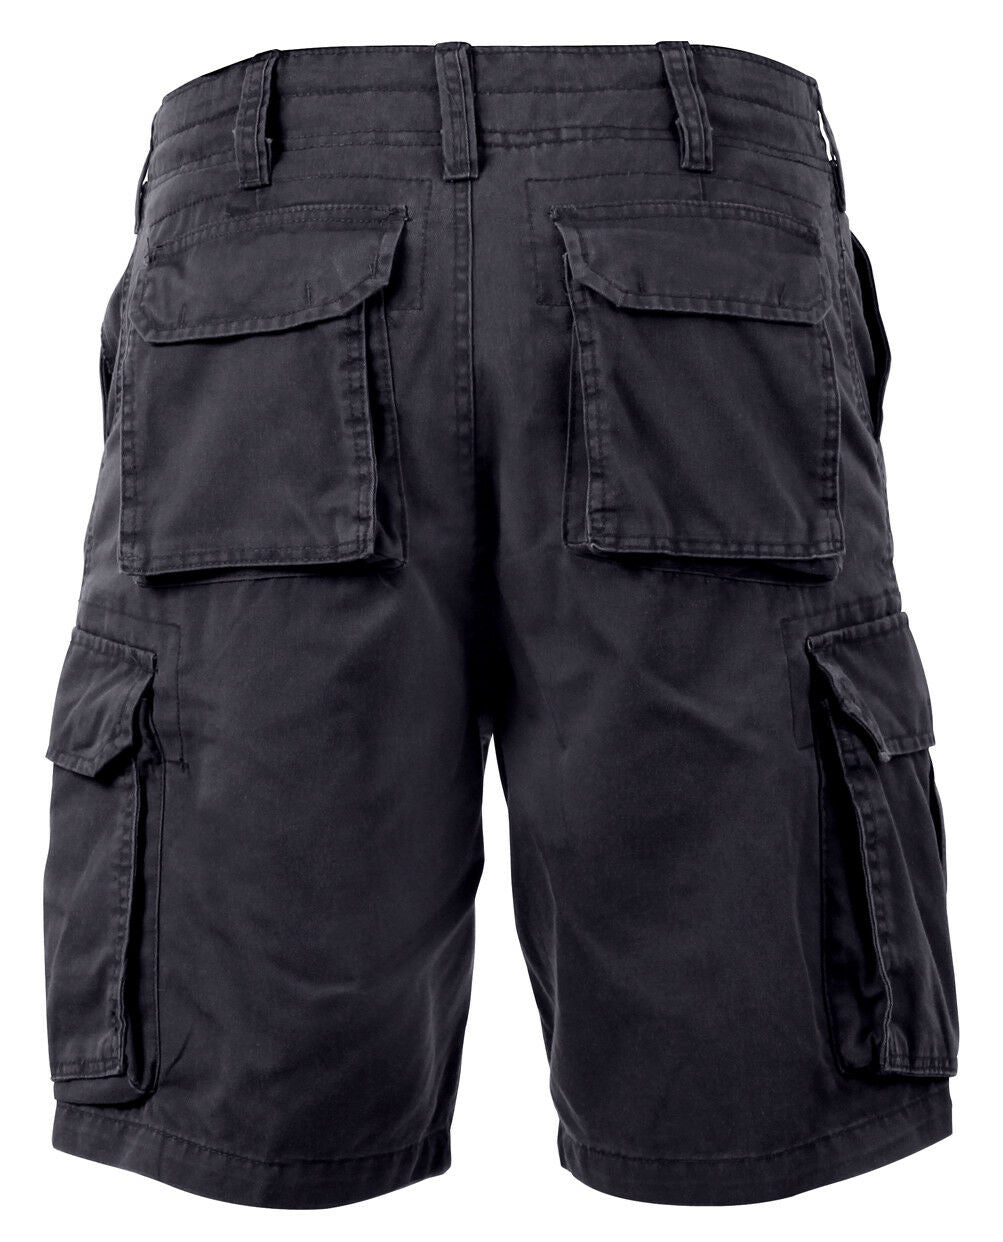 Rothco Vintage Solid Paratrooper Cargo Shorts - Black